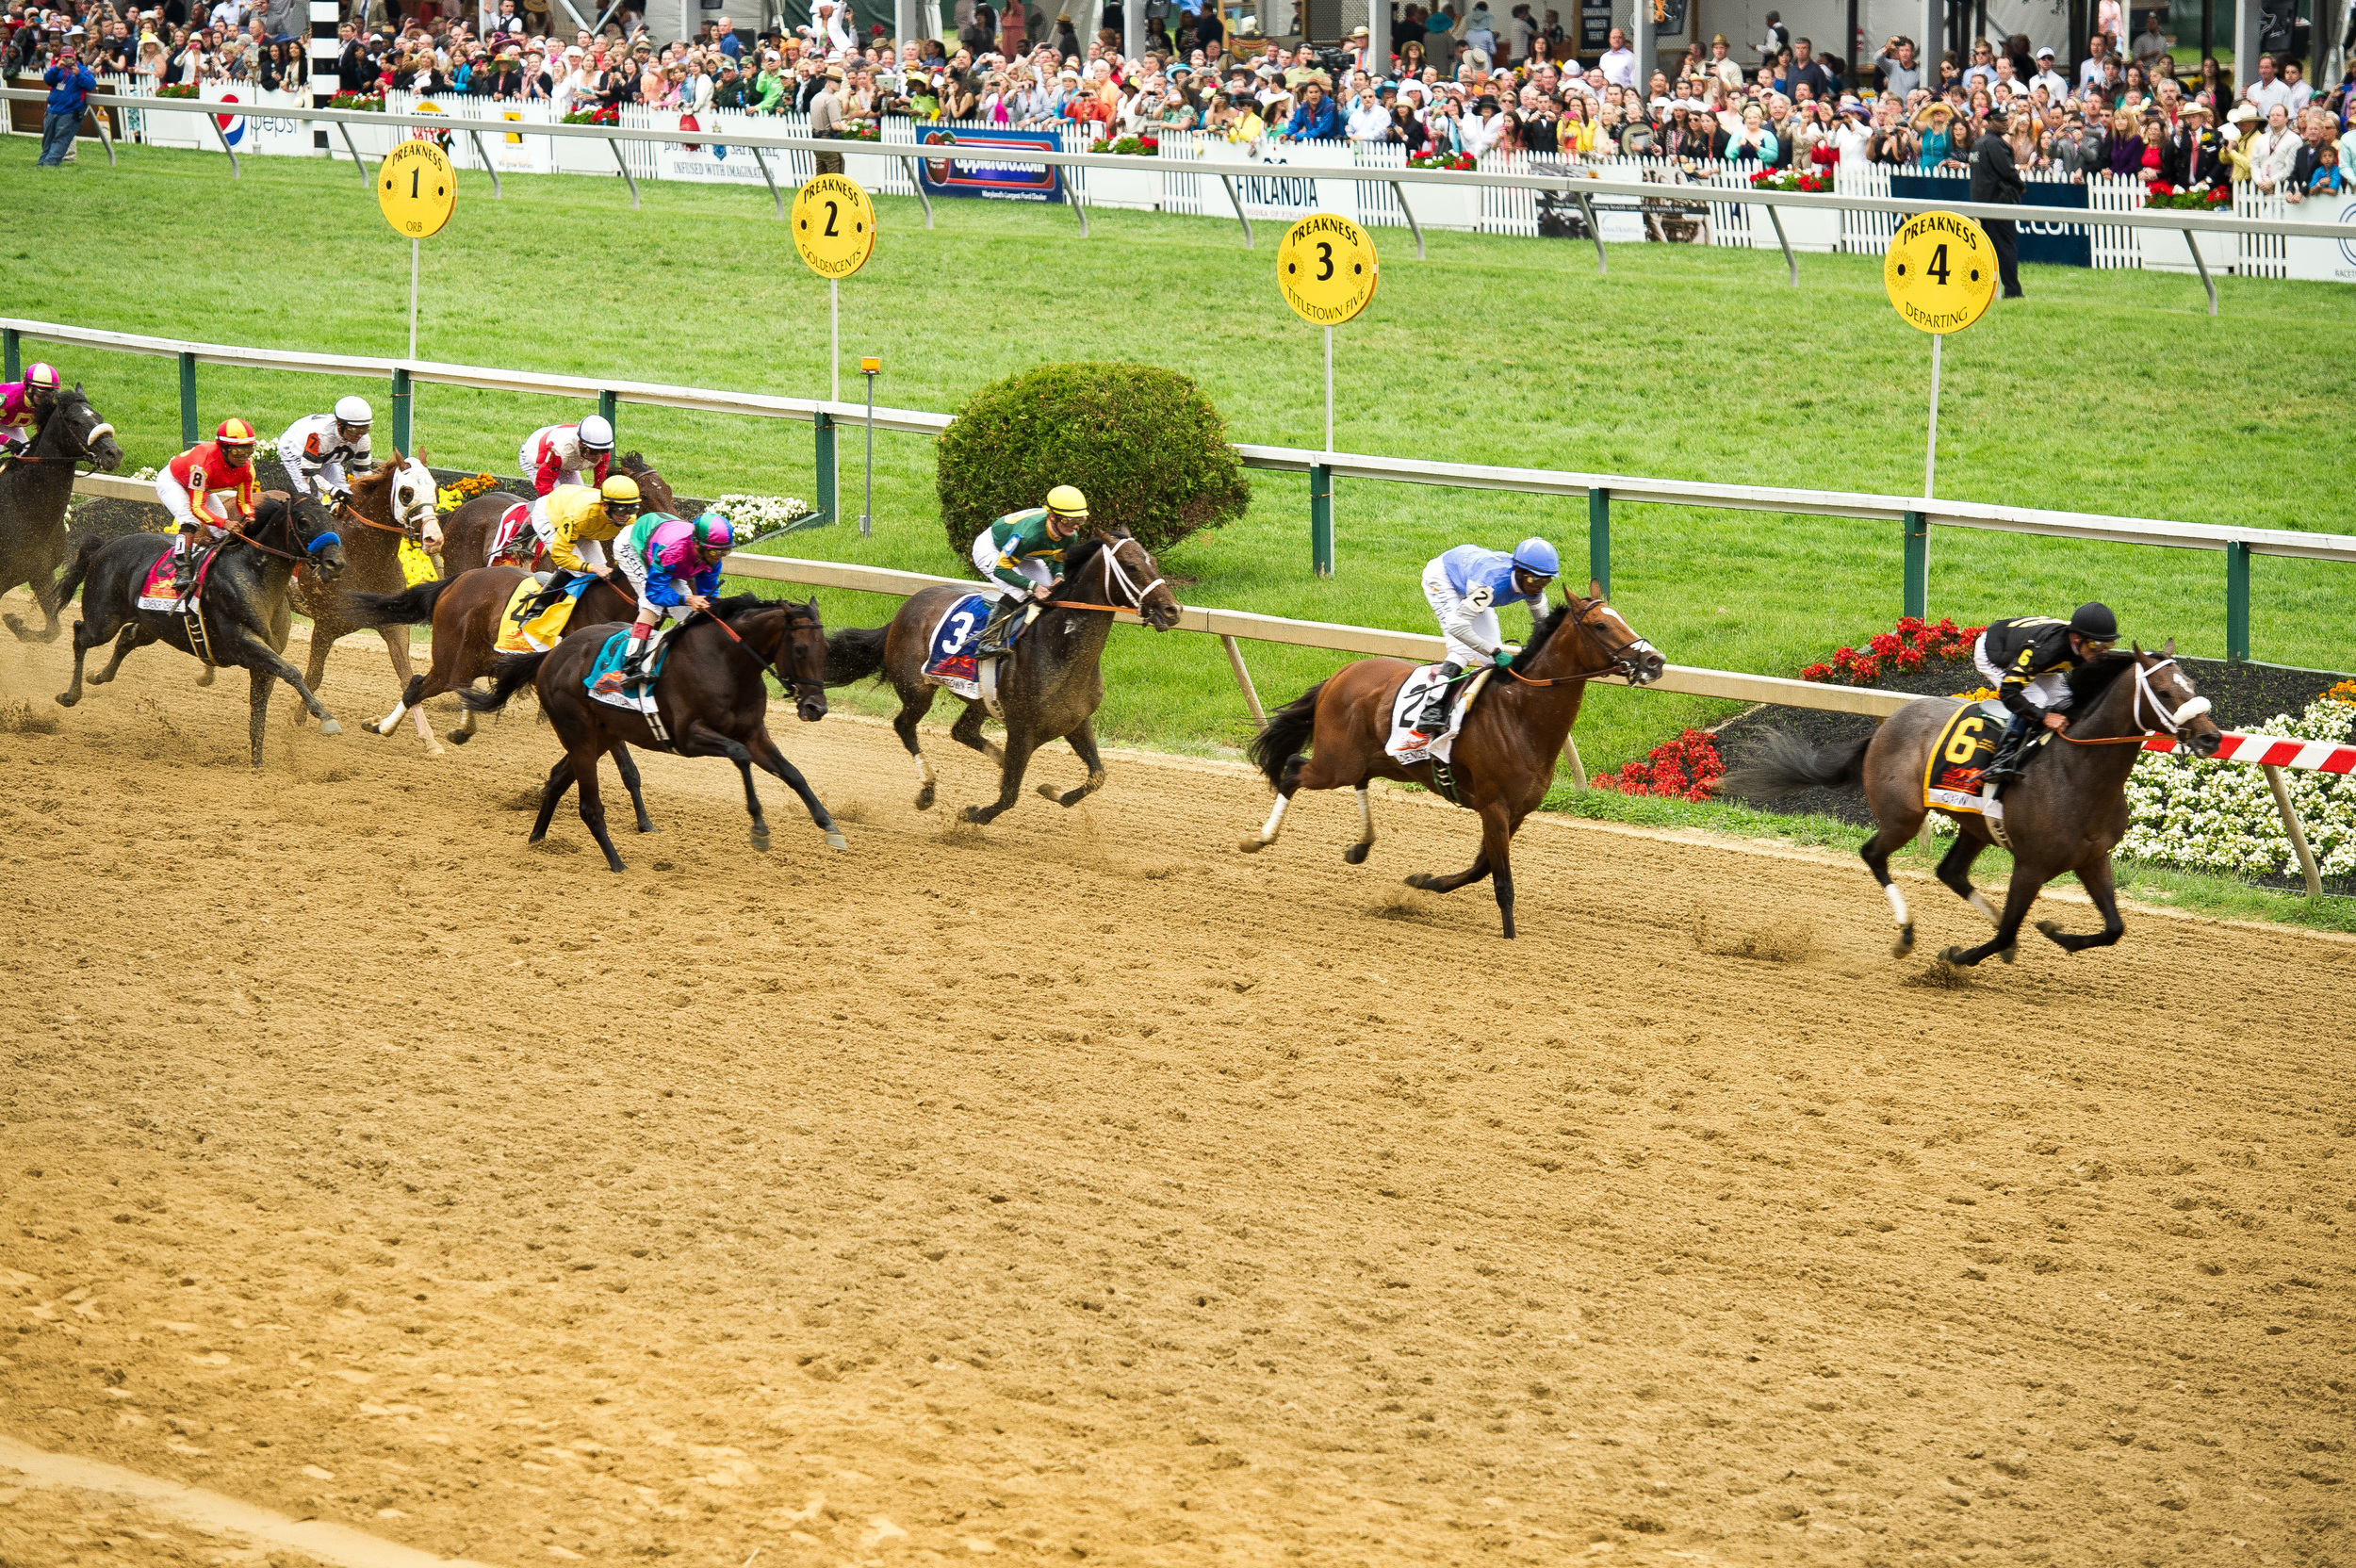  Finish of the 2013 Preakness Stakes  By Maryland GovPics (Flickr: The 138th Annual Preakness) [CC BY 2.0 (http://creativecommons.org/licenses/by/2.0)], via Wikimedia Commons 